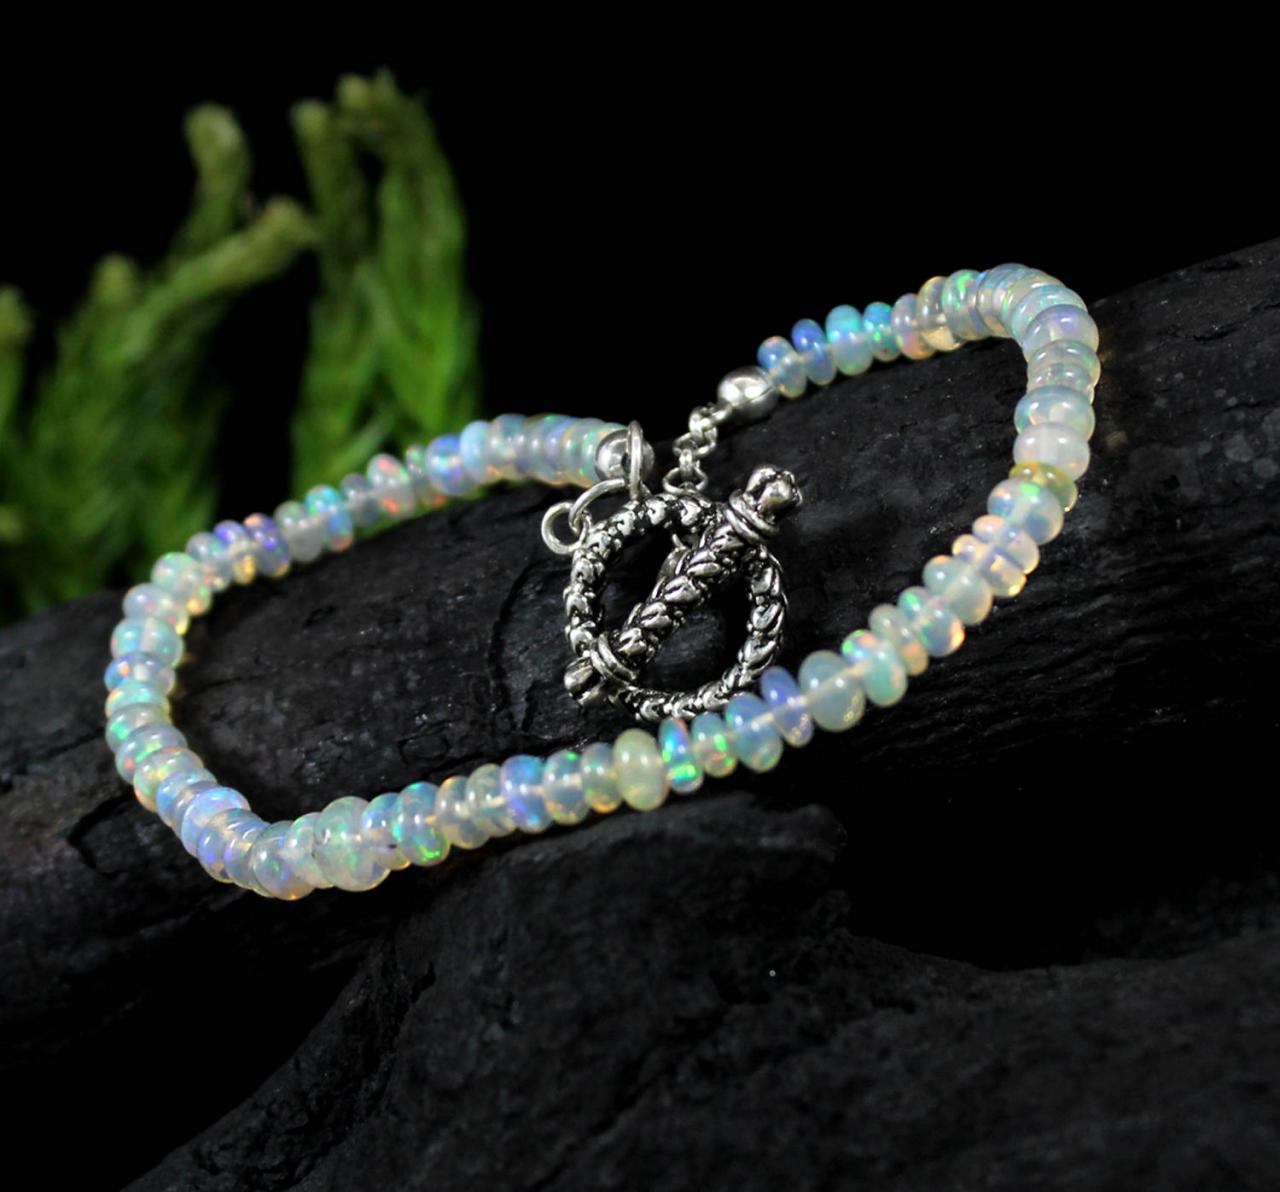 Natural Opal Beads Bracelet,dainty Elegant Bracelet,fire Opal Jewelry,anniversary Gift For Wife,birthday Present For Mom,925 Silver Tb1010